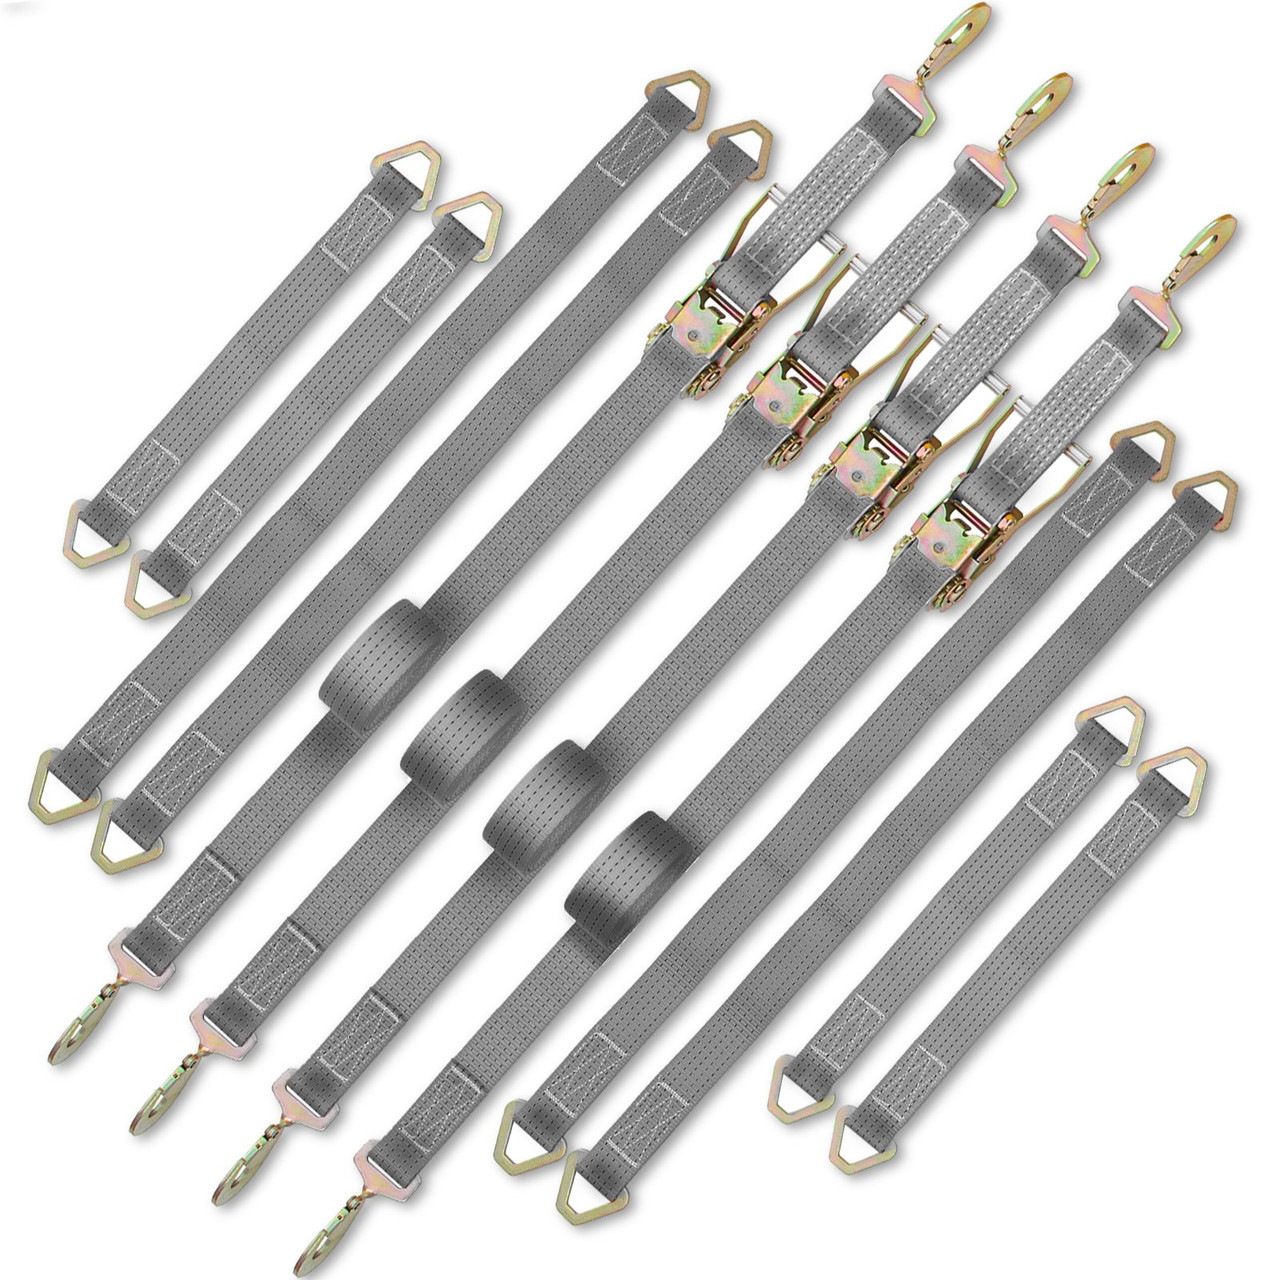 Ratchet Tie Down Strap Ratchet Strap 15.6 Ft 2 In 12pcs Security Fastening